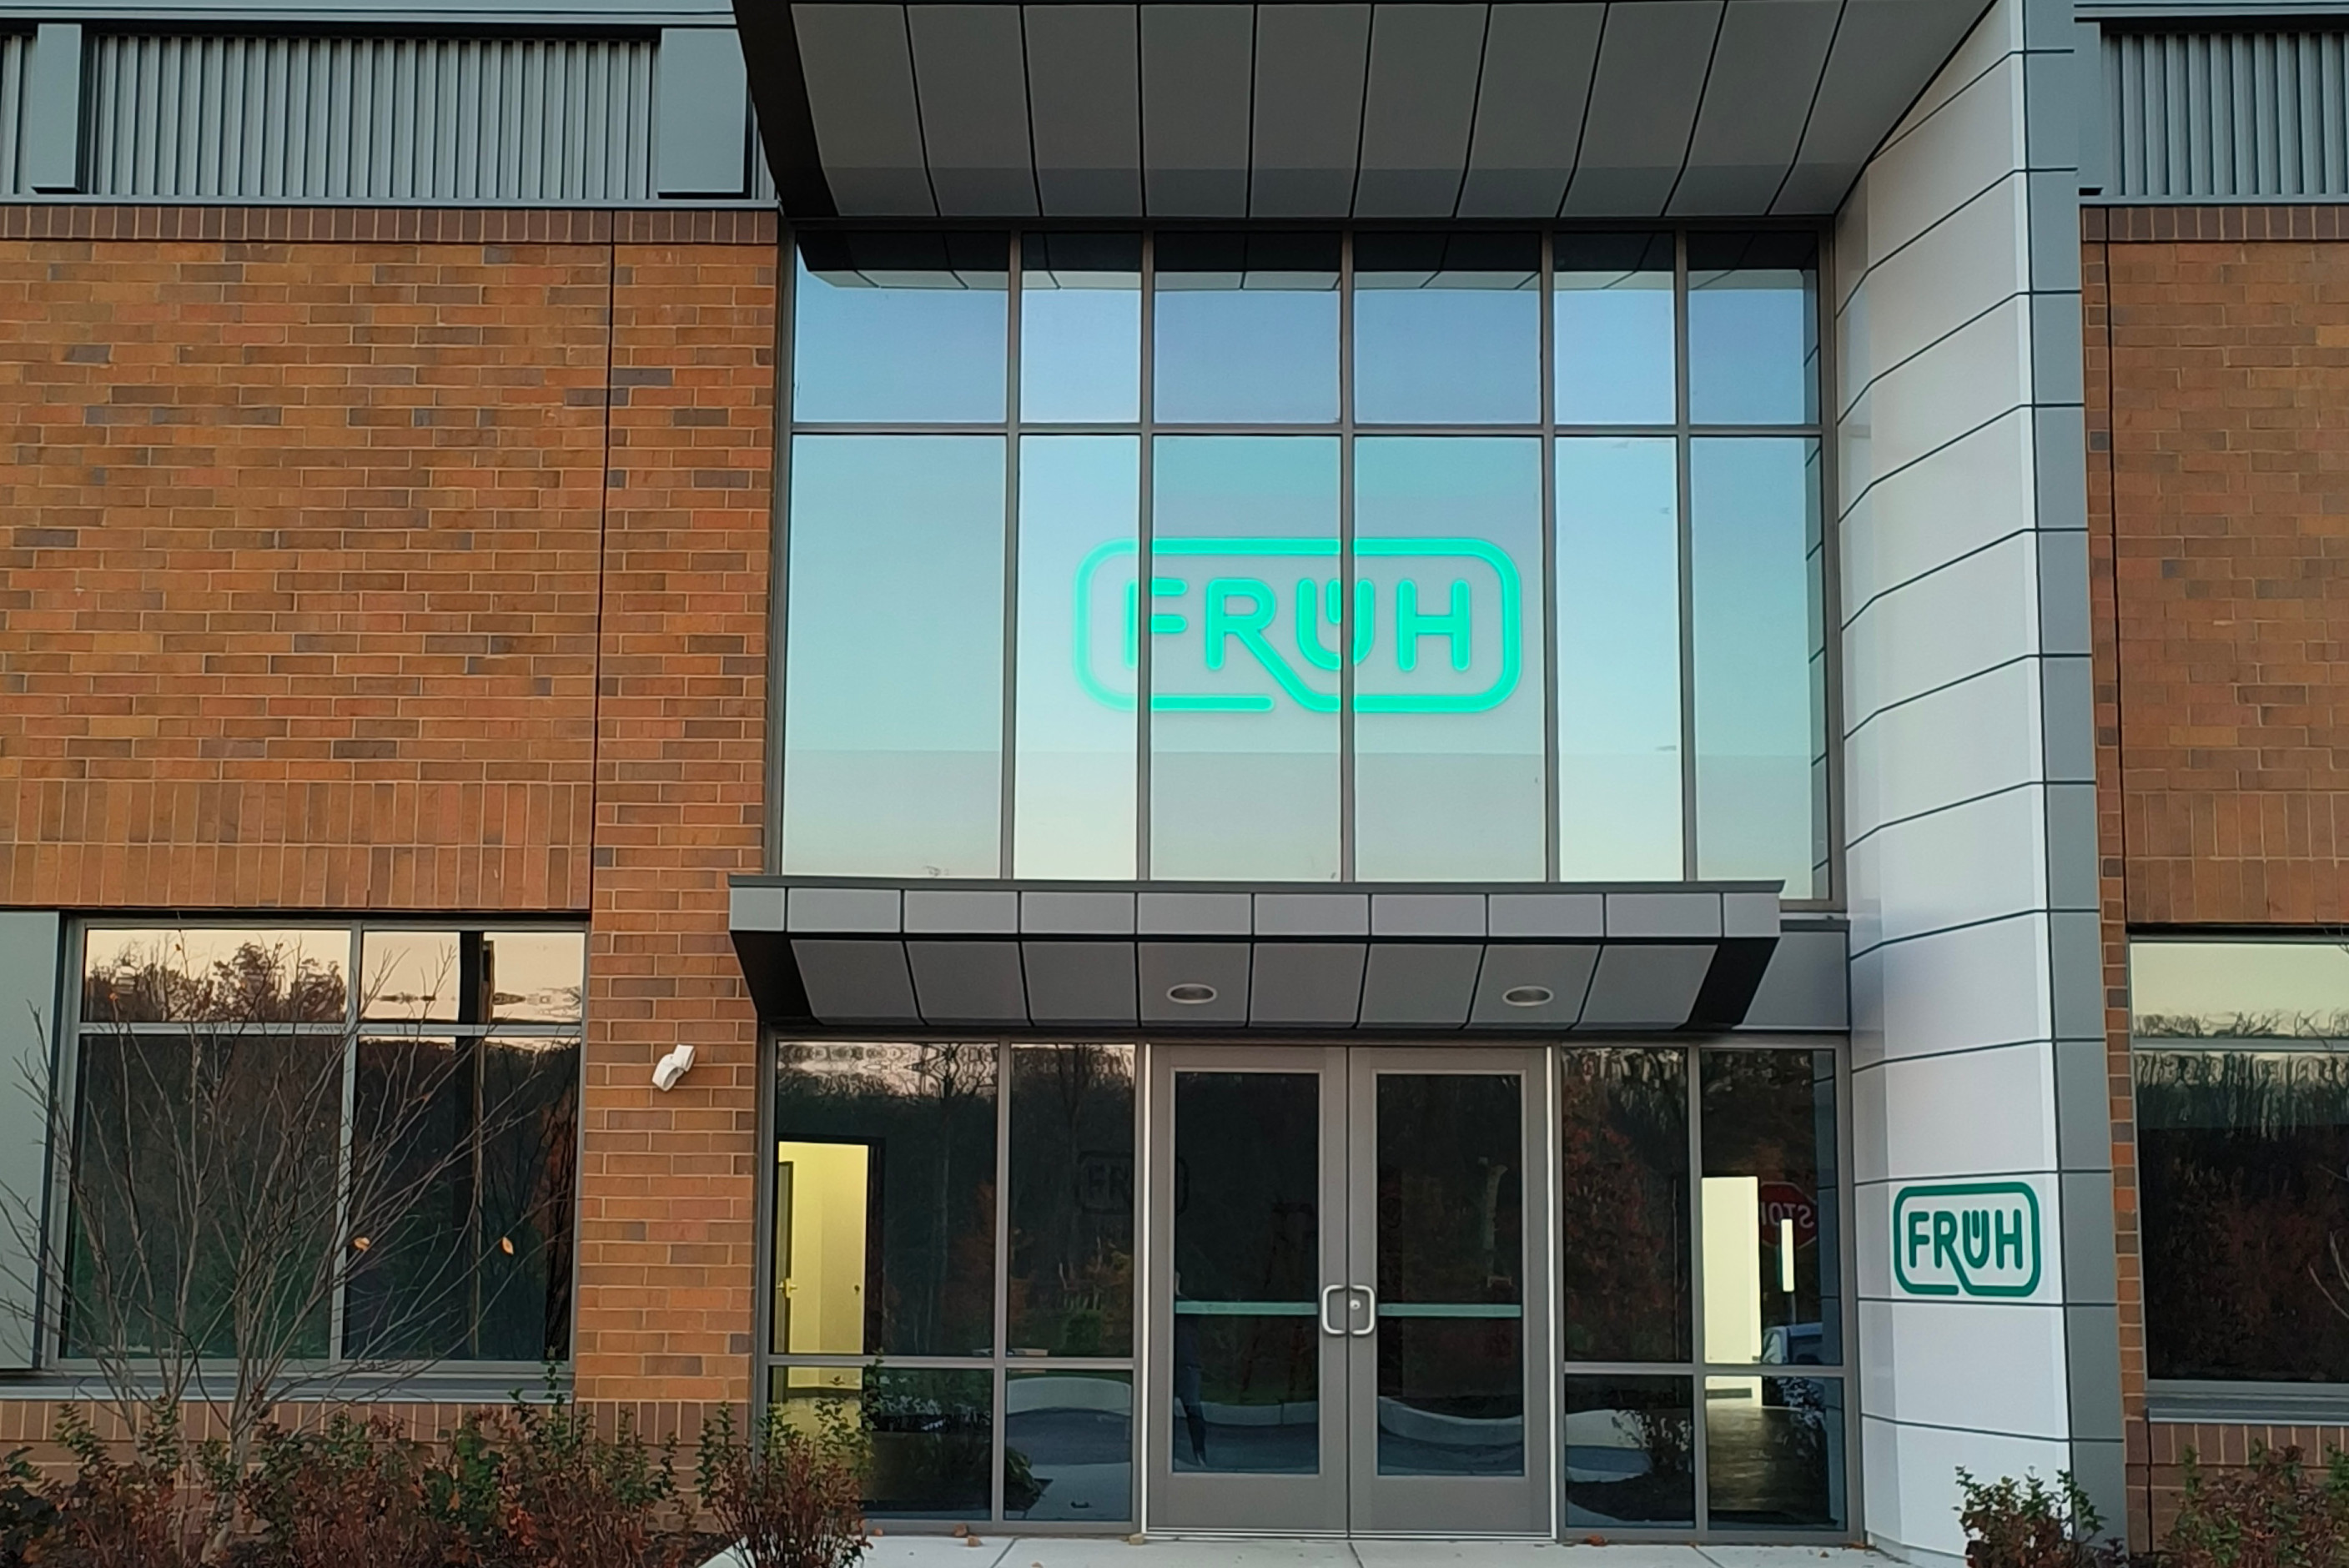 Fruh entrance by day